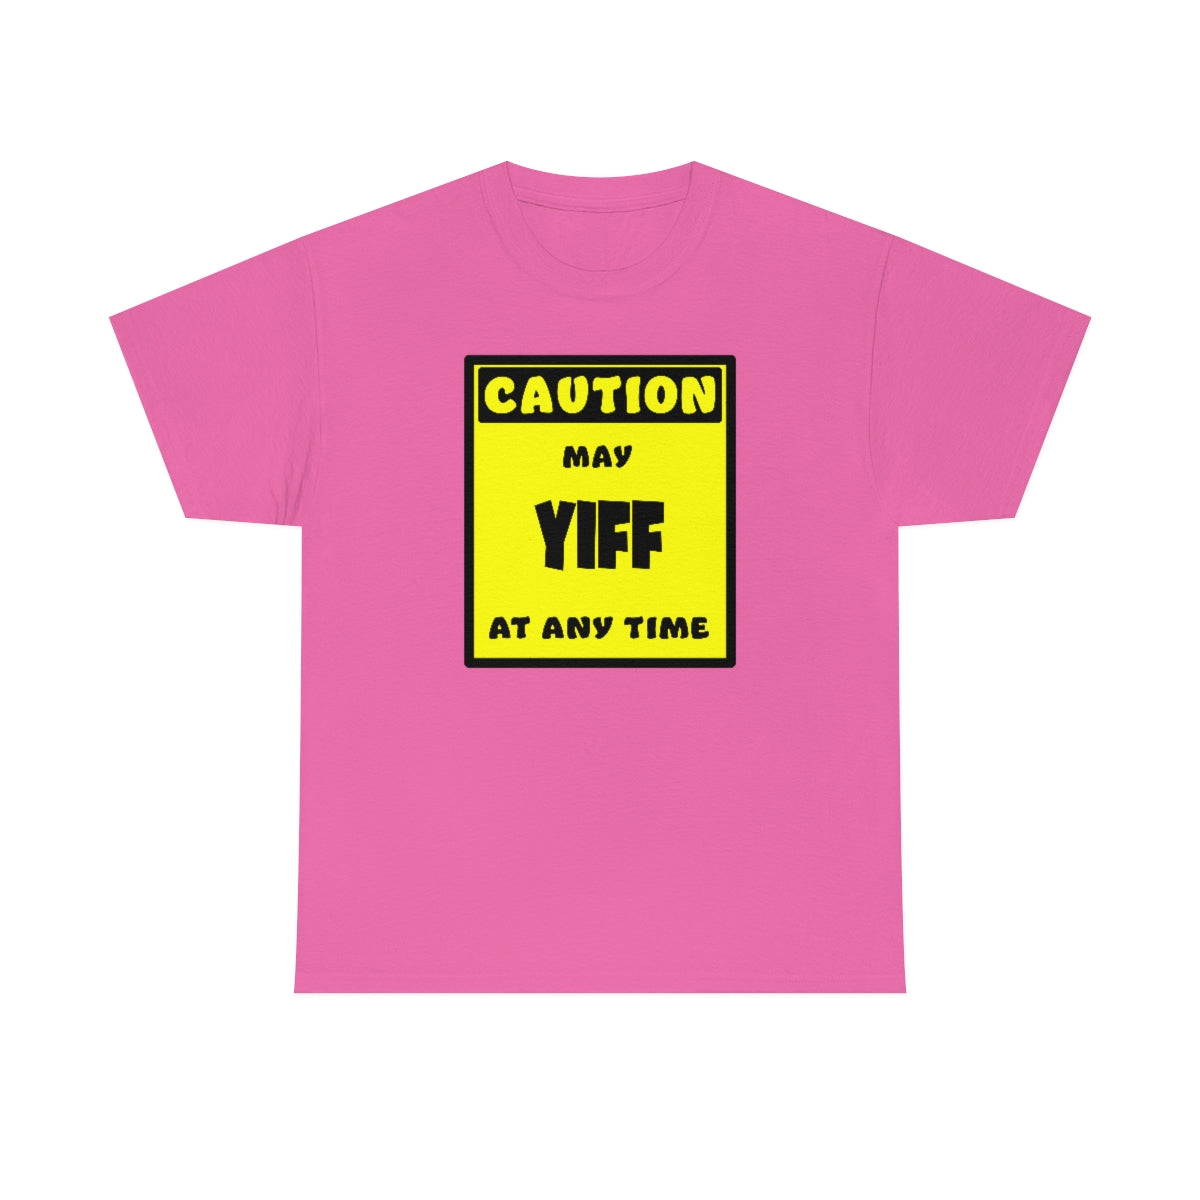 CAUTION! May YIFF at any time! - T-Shirt T-Shirt AFLT-Whootorca Pink S 